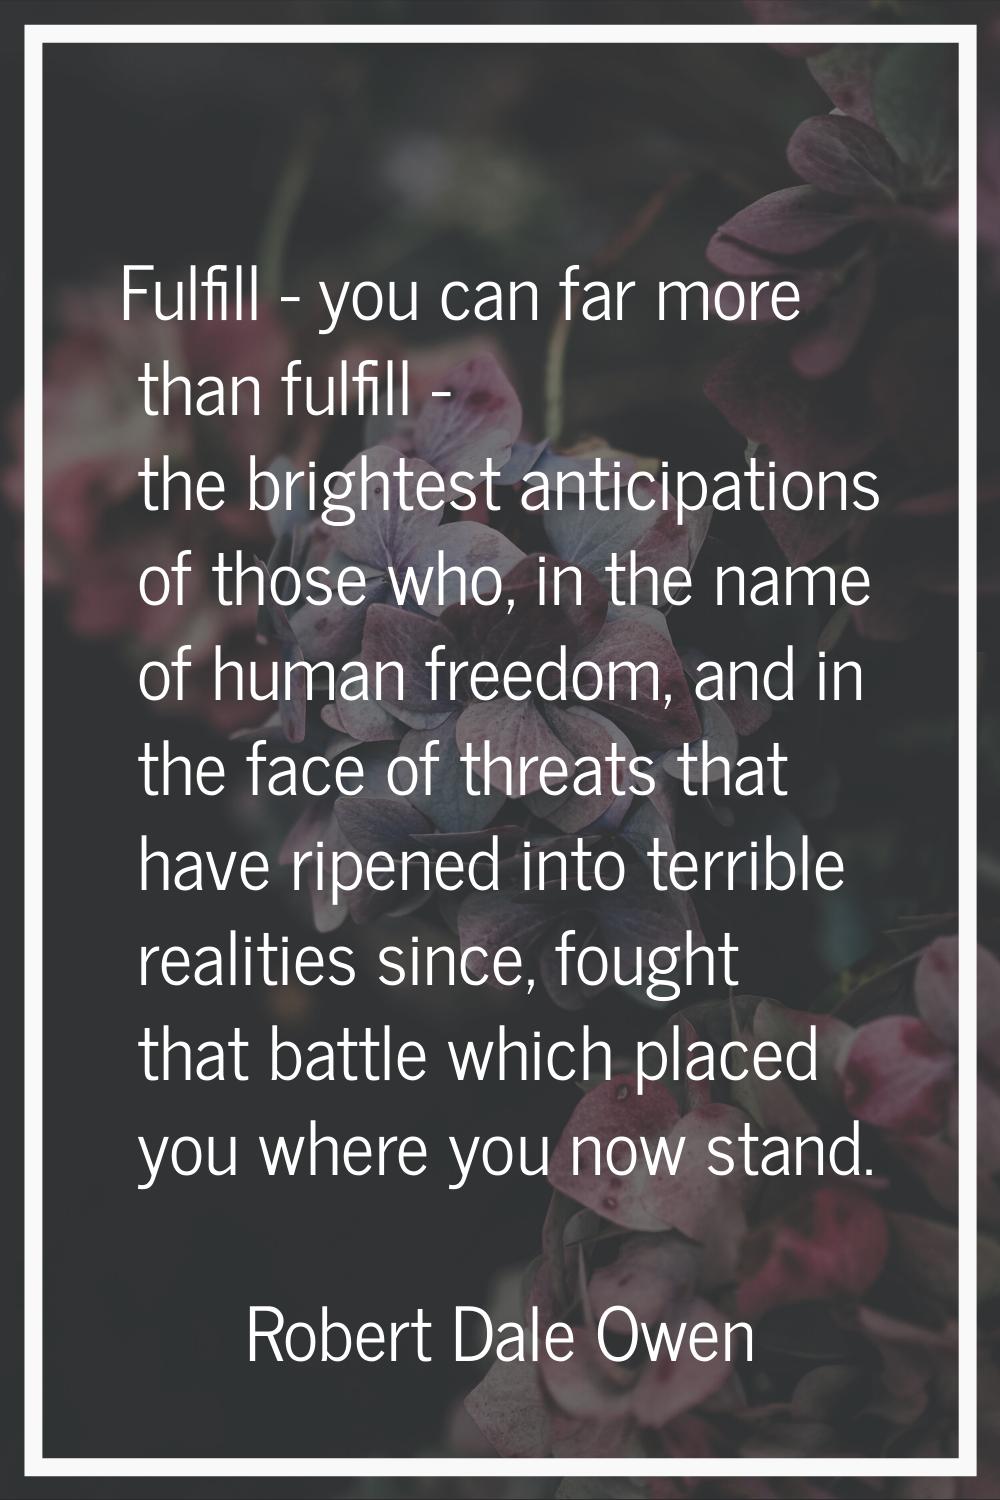 Fulfill - you can far more than fulfill - the brightest anticipations of those who, in the name of 